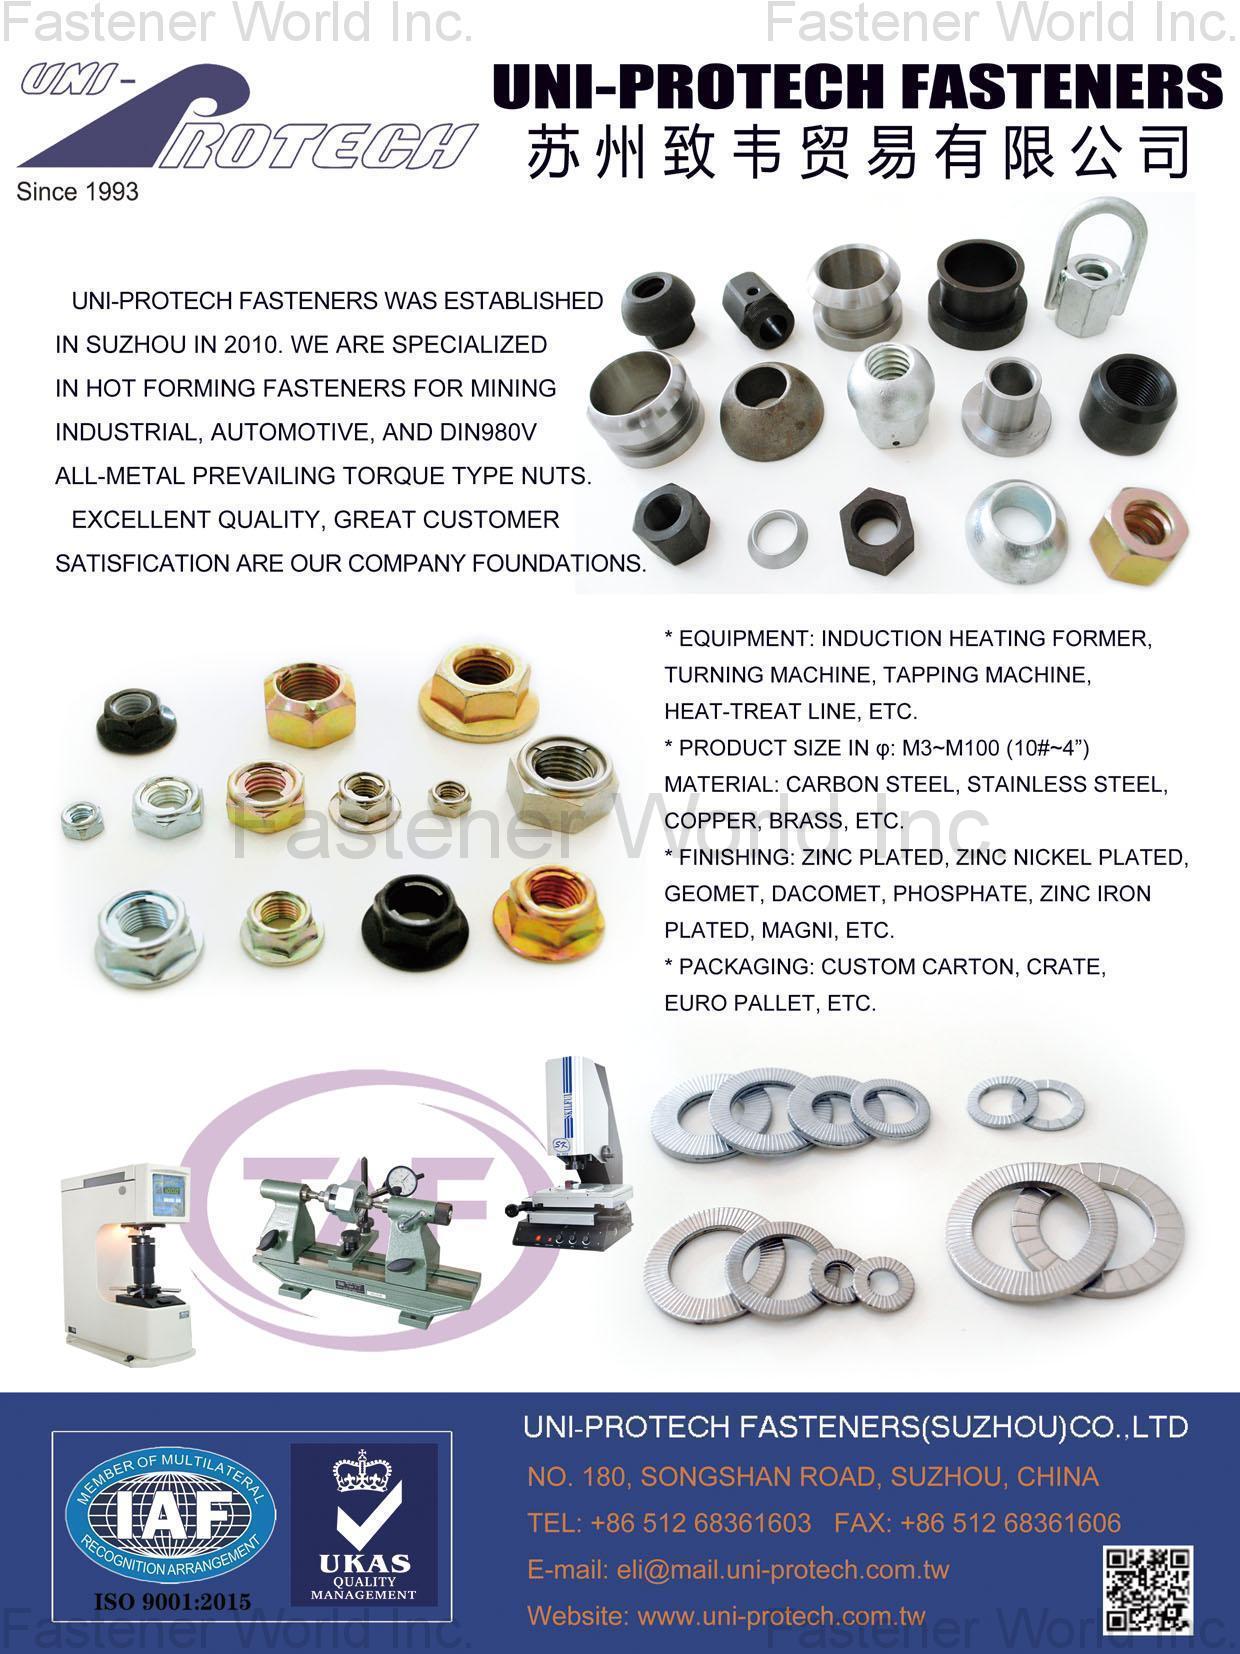 Turning Parts,Automotive Parts,Coupling Nuts,Prevailing Torque Nuts,U Nuts,Stamped Parts,Lug Nuts,Wheel Nuts,Slotted Nuts,Castle Nuts,Security Screws,Construction Fasteners